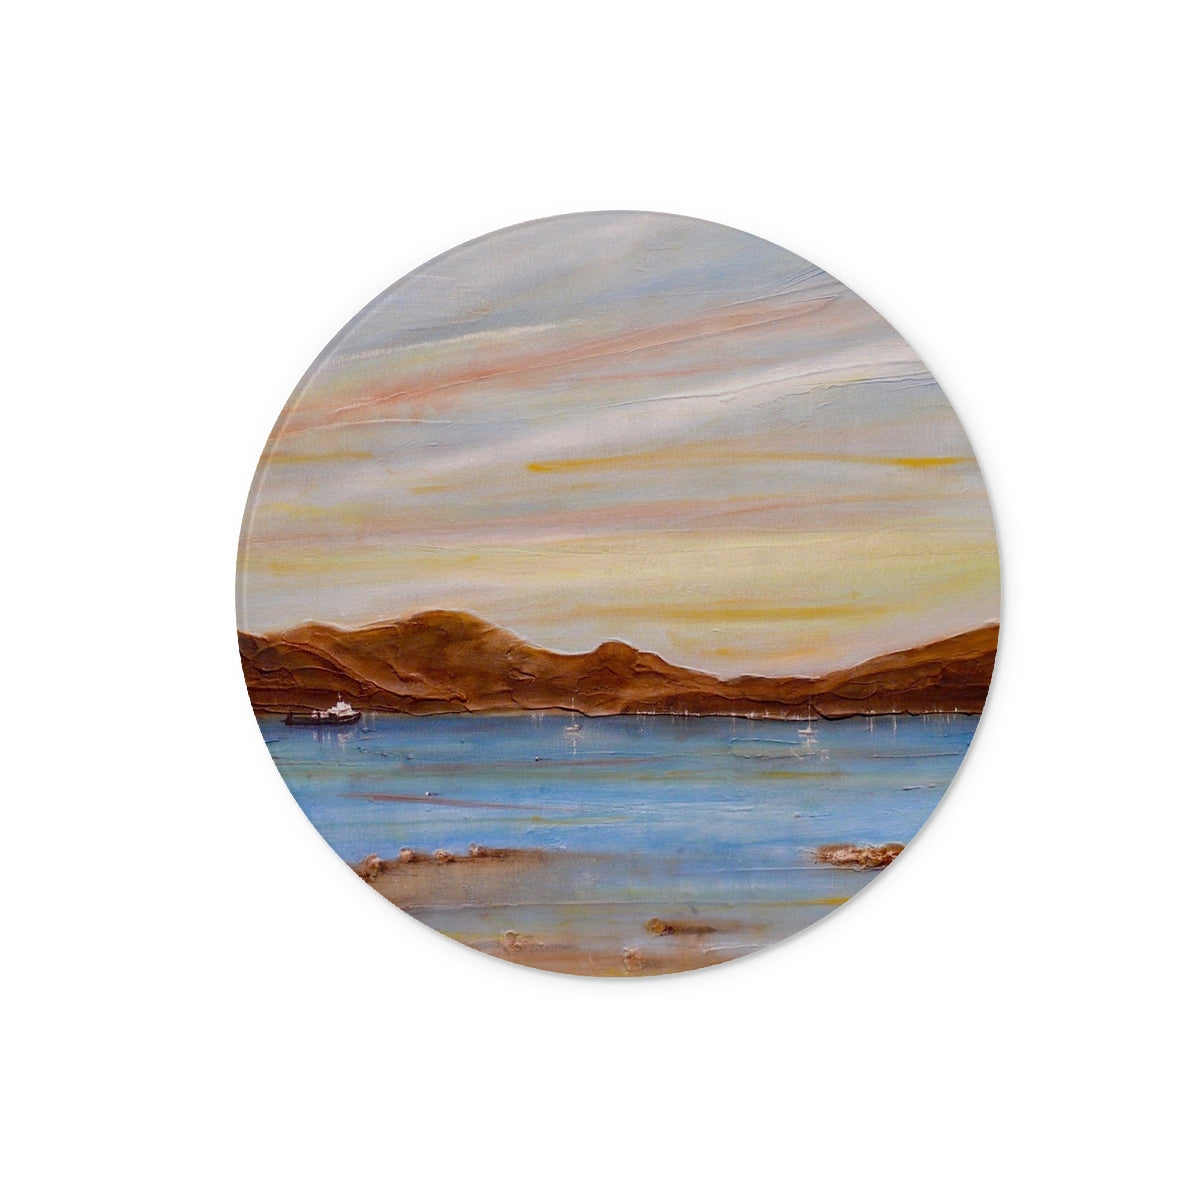 The Last Ferry To Dunoon Art Gifts Glass Chopping Board-Glass Chopping Boards-River Clyde Art Gallery-12" Round-Paintings, Prints, Homeware, Art Gifts From Scotland By Scottish Artist Kevin Hunter